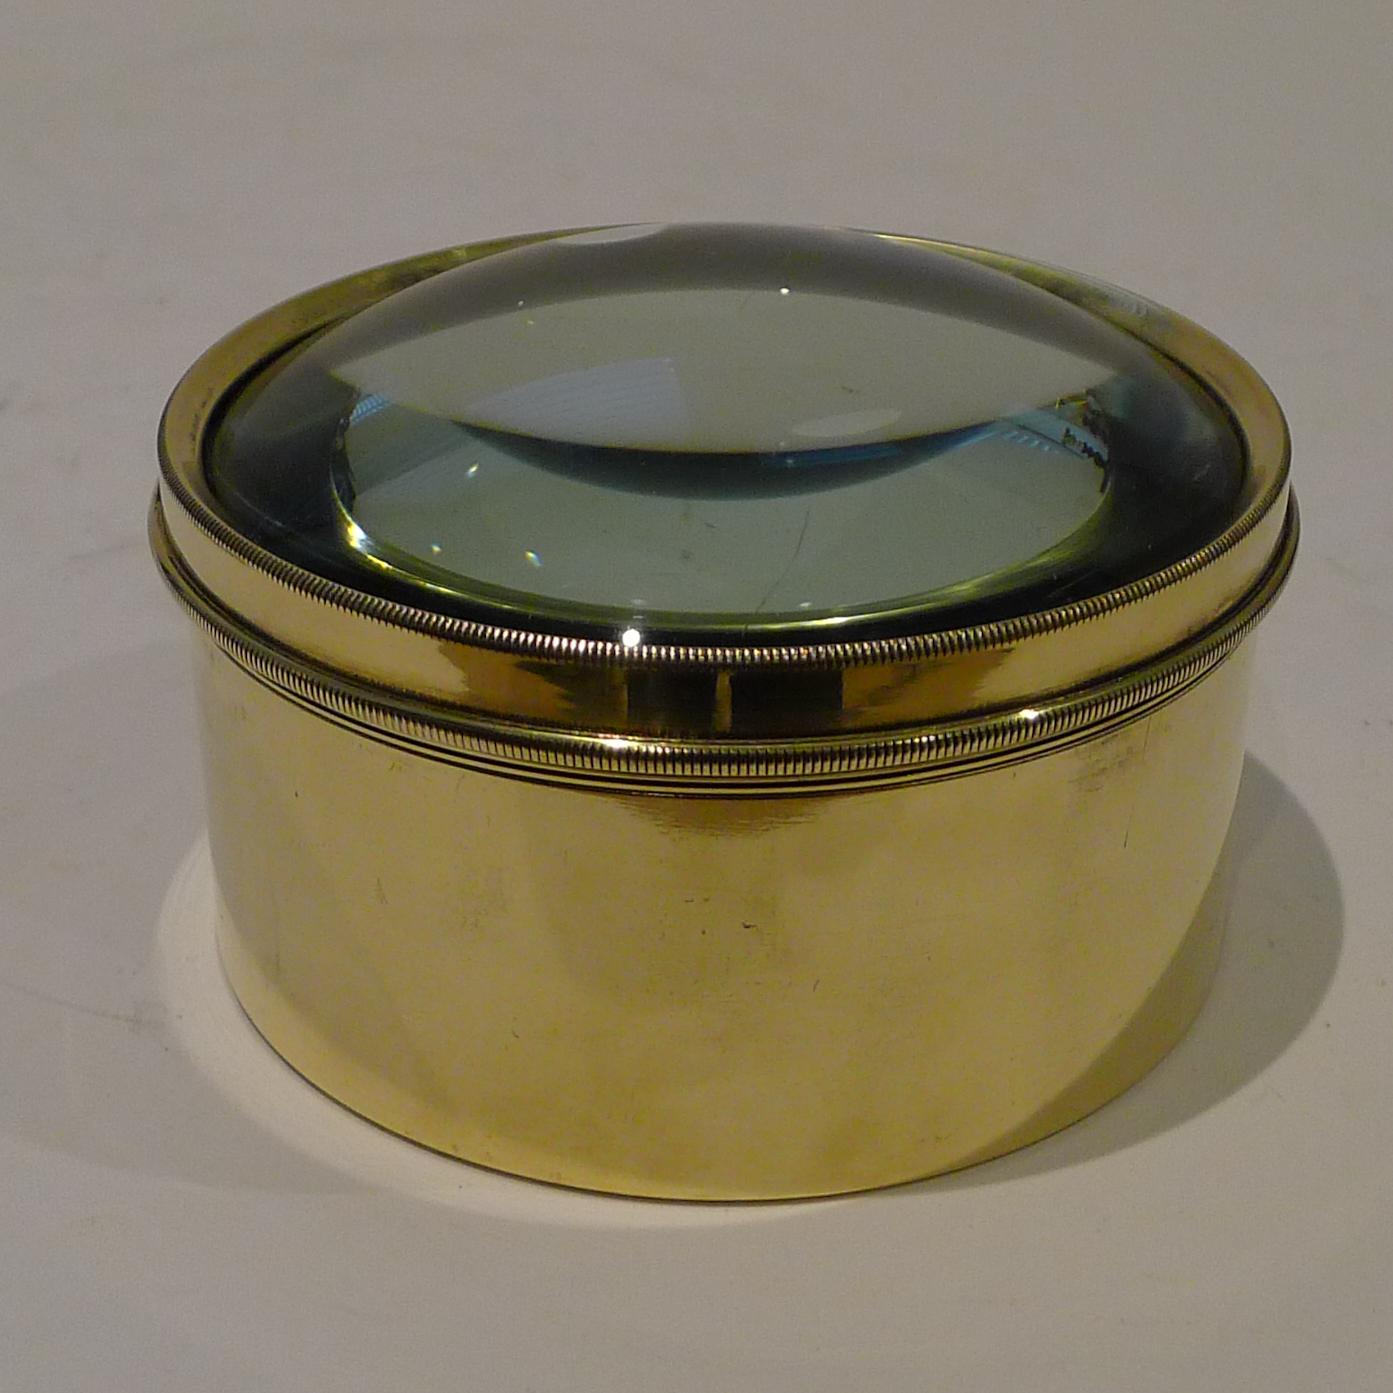 Always very popular and a very useful desk-top accessory. These large circular magnifiers actually are the condenser or magnifier from a Magic Lantern dating to around 1910; they are rescued, polished up and put back to use in the modern day.

This